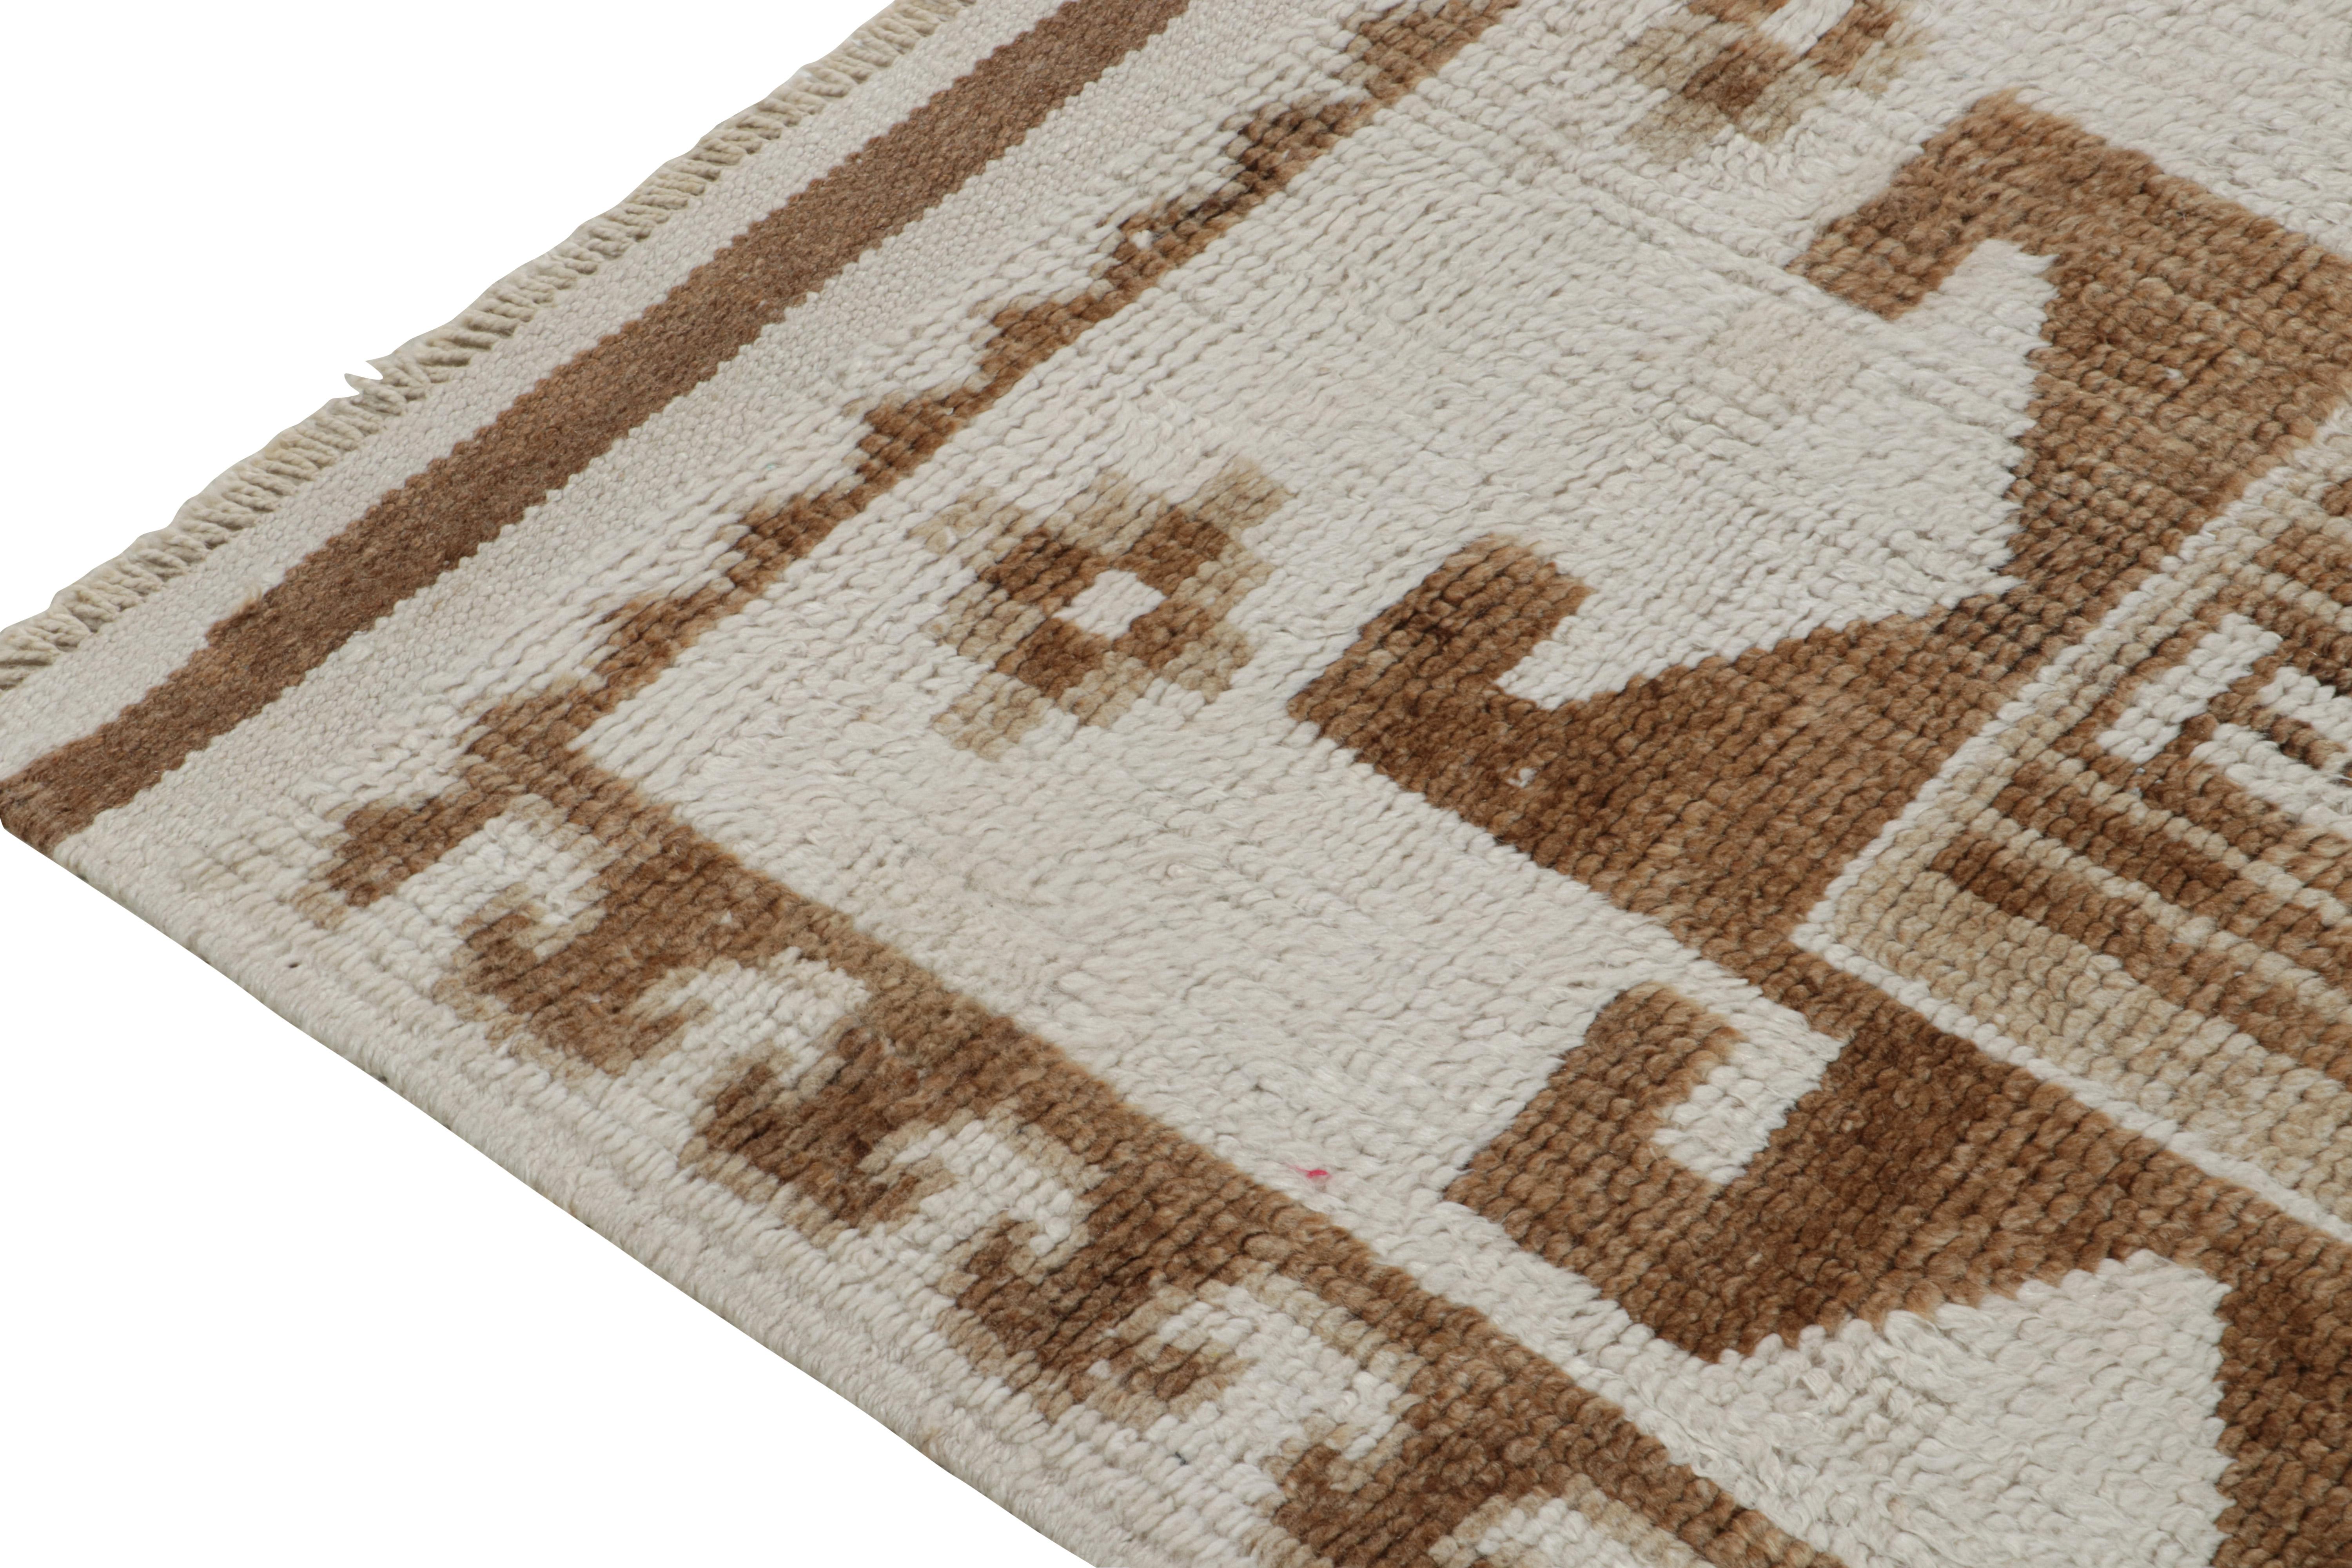 Vintage Tribal Runner in White & Beige-Brown Geometric Patterns by Rug & Kilim In Good Condition For Sale In Long Island City, NY